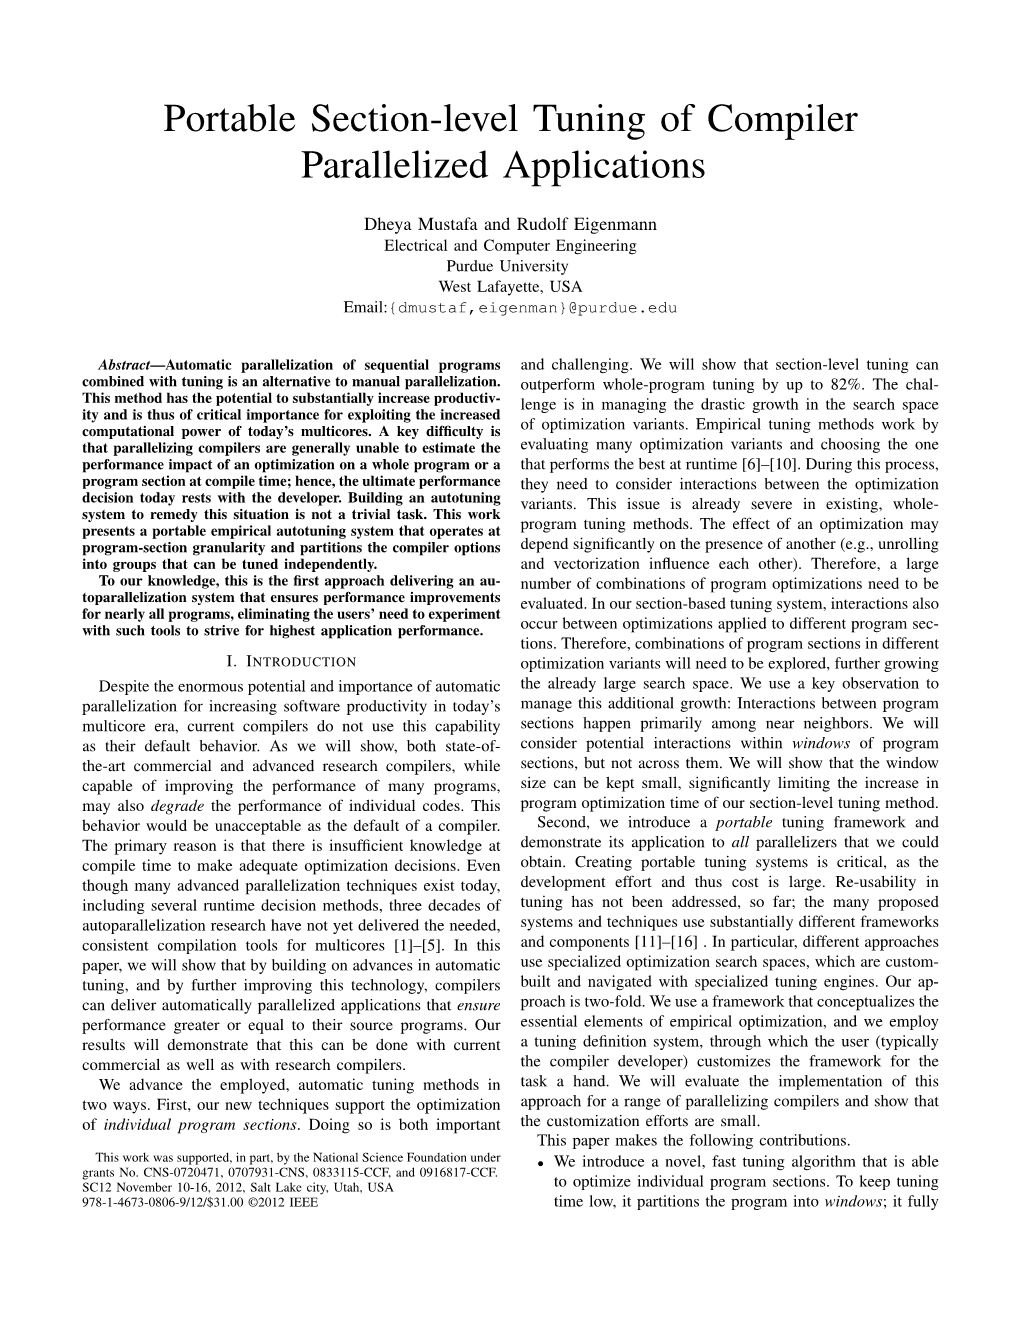 Portable Section-Level Tuning of Compiler Parallelized Applications